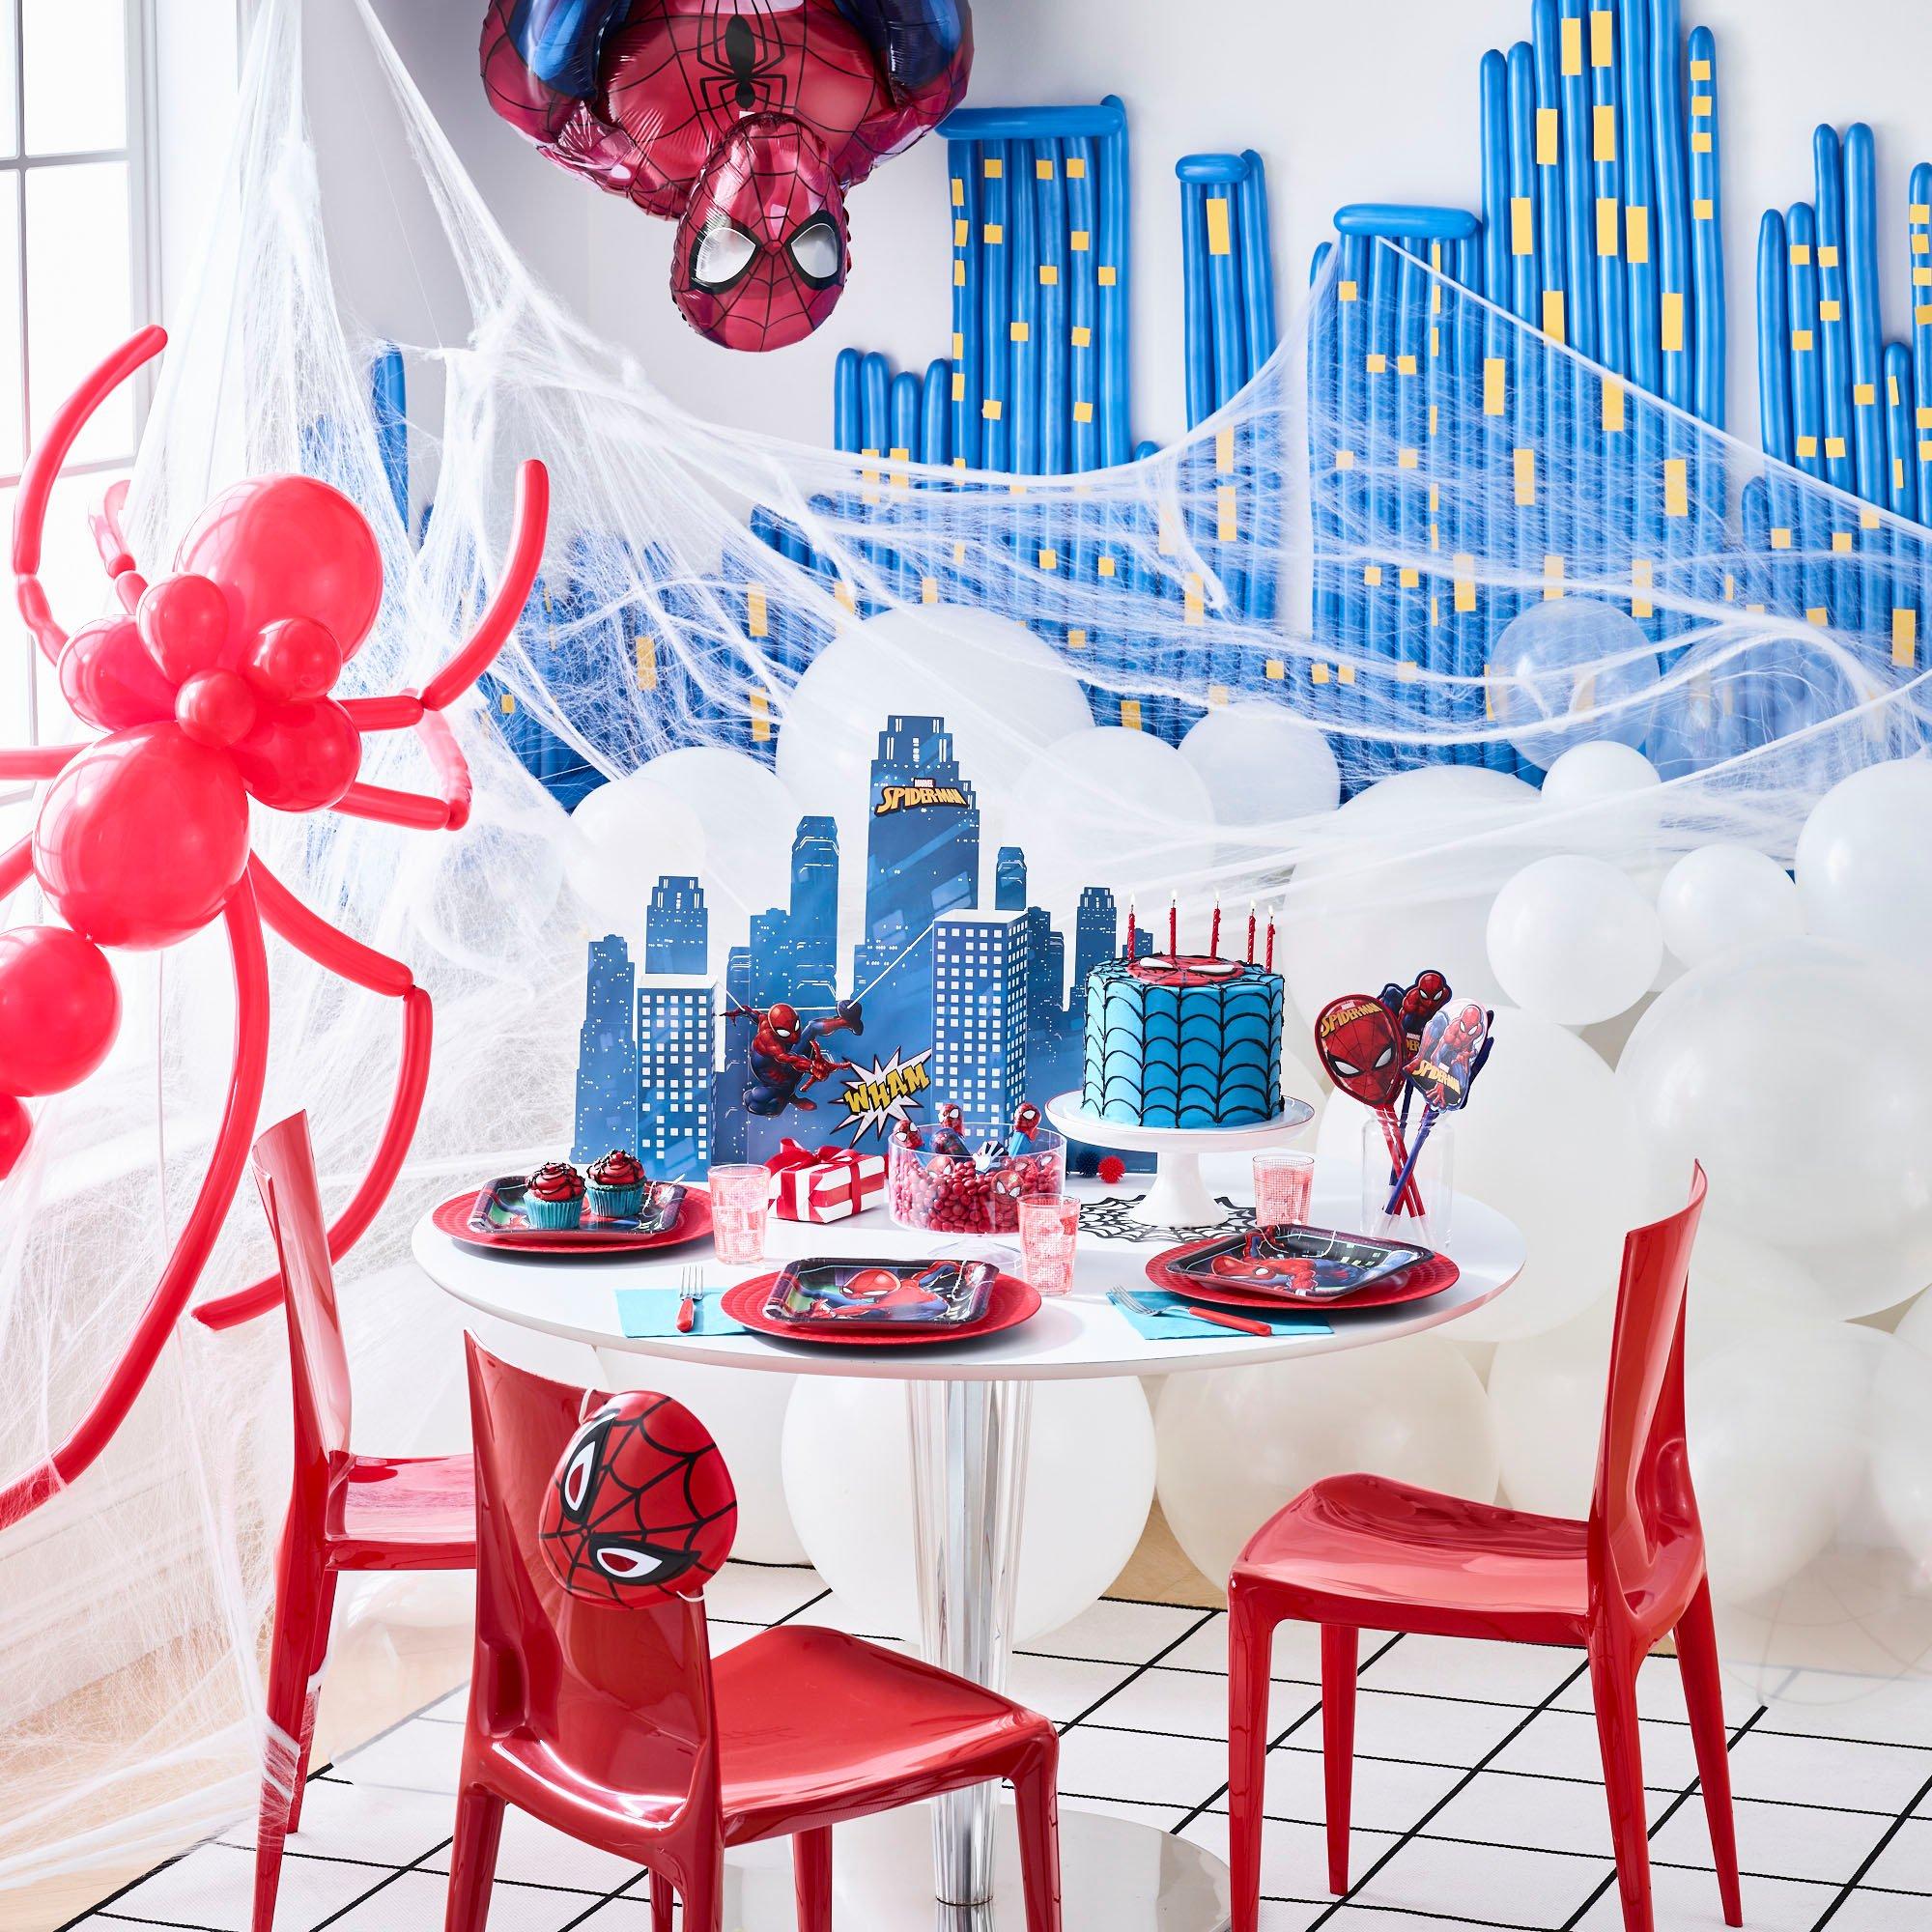 Shop the Collection: Spider-Man Birthday Party | Party City